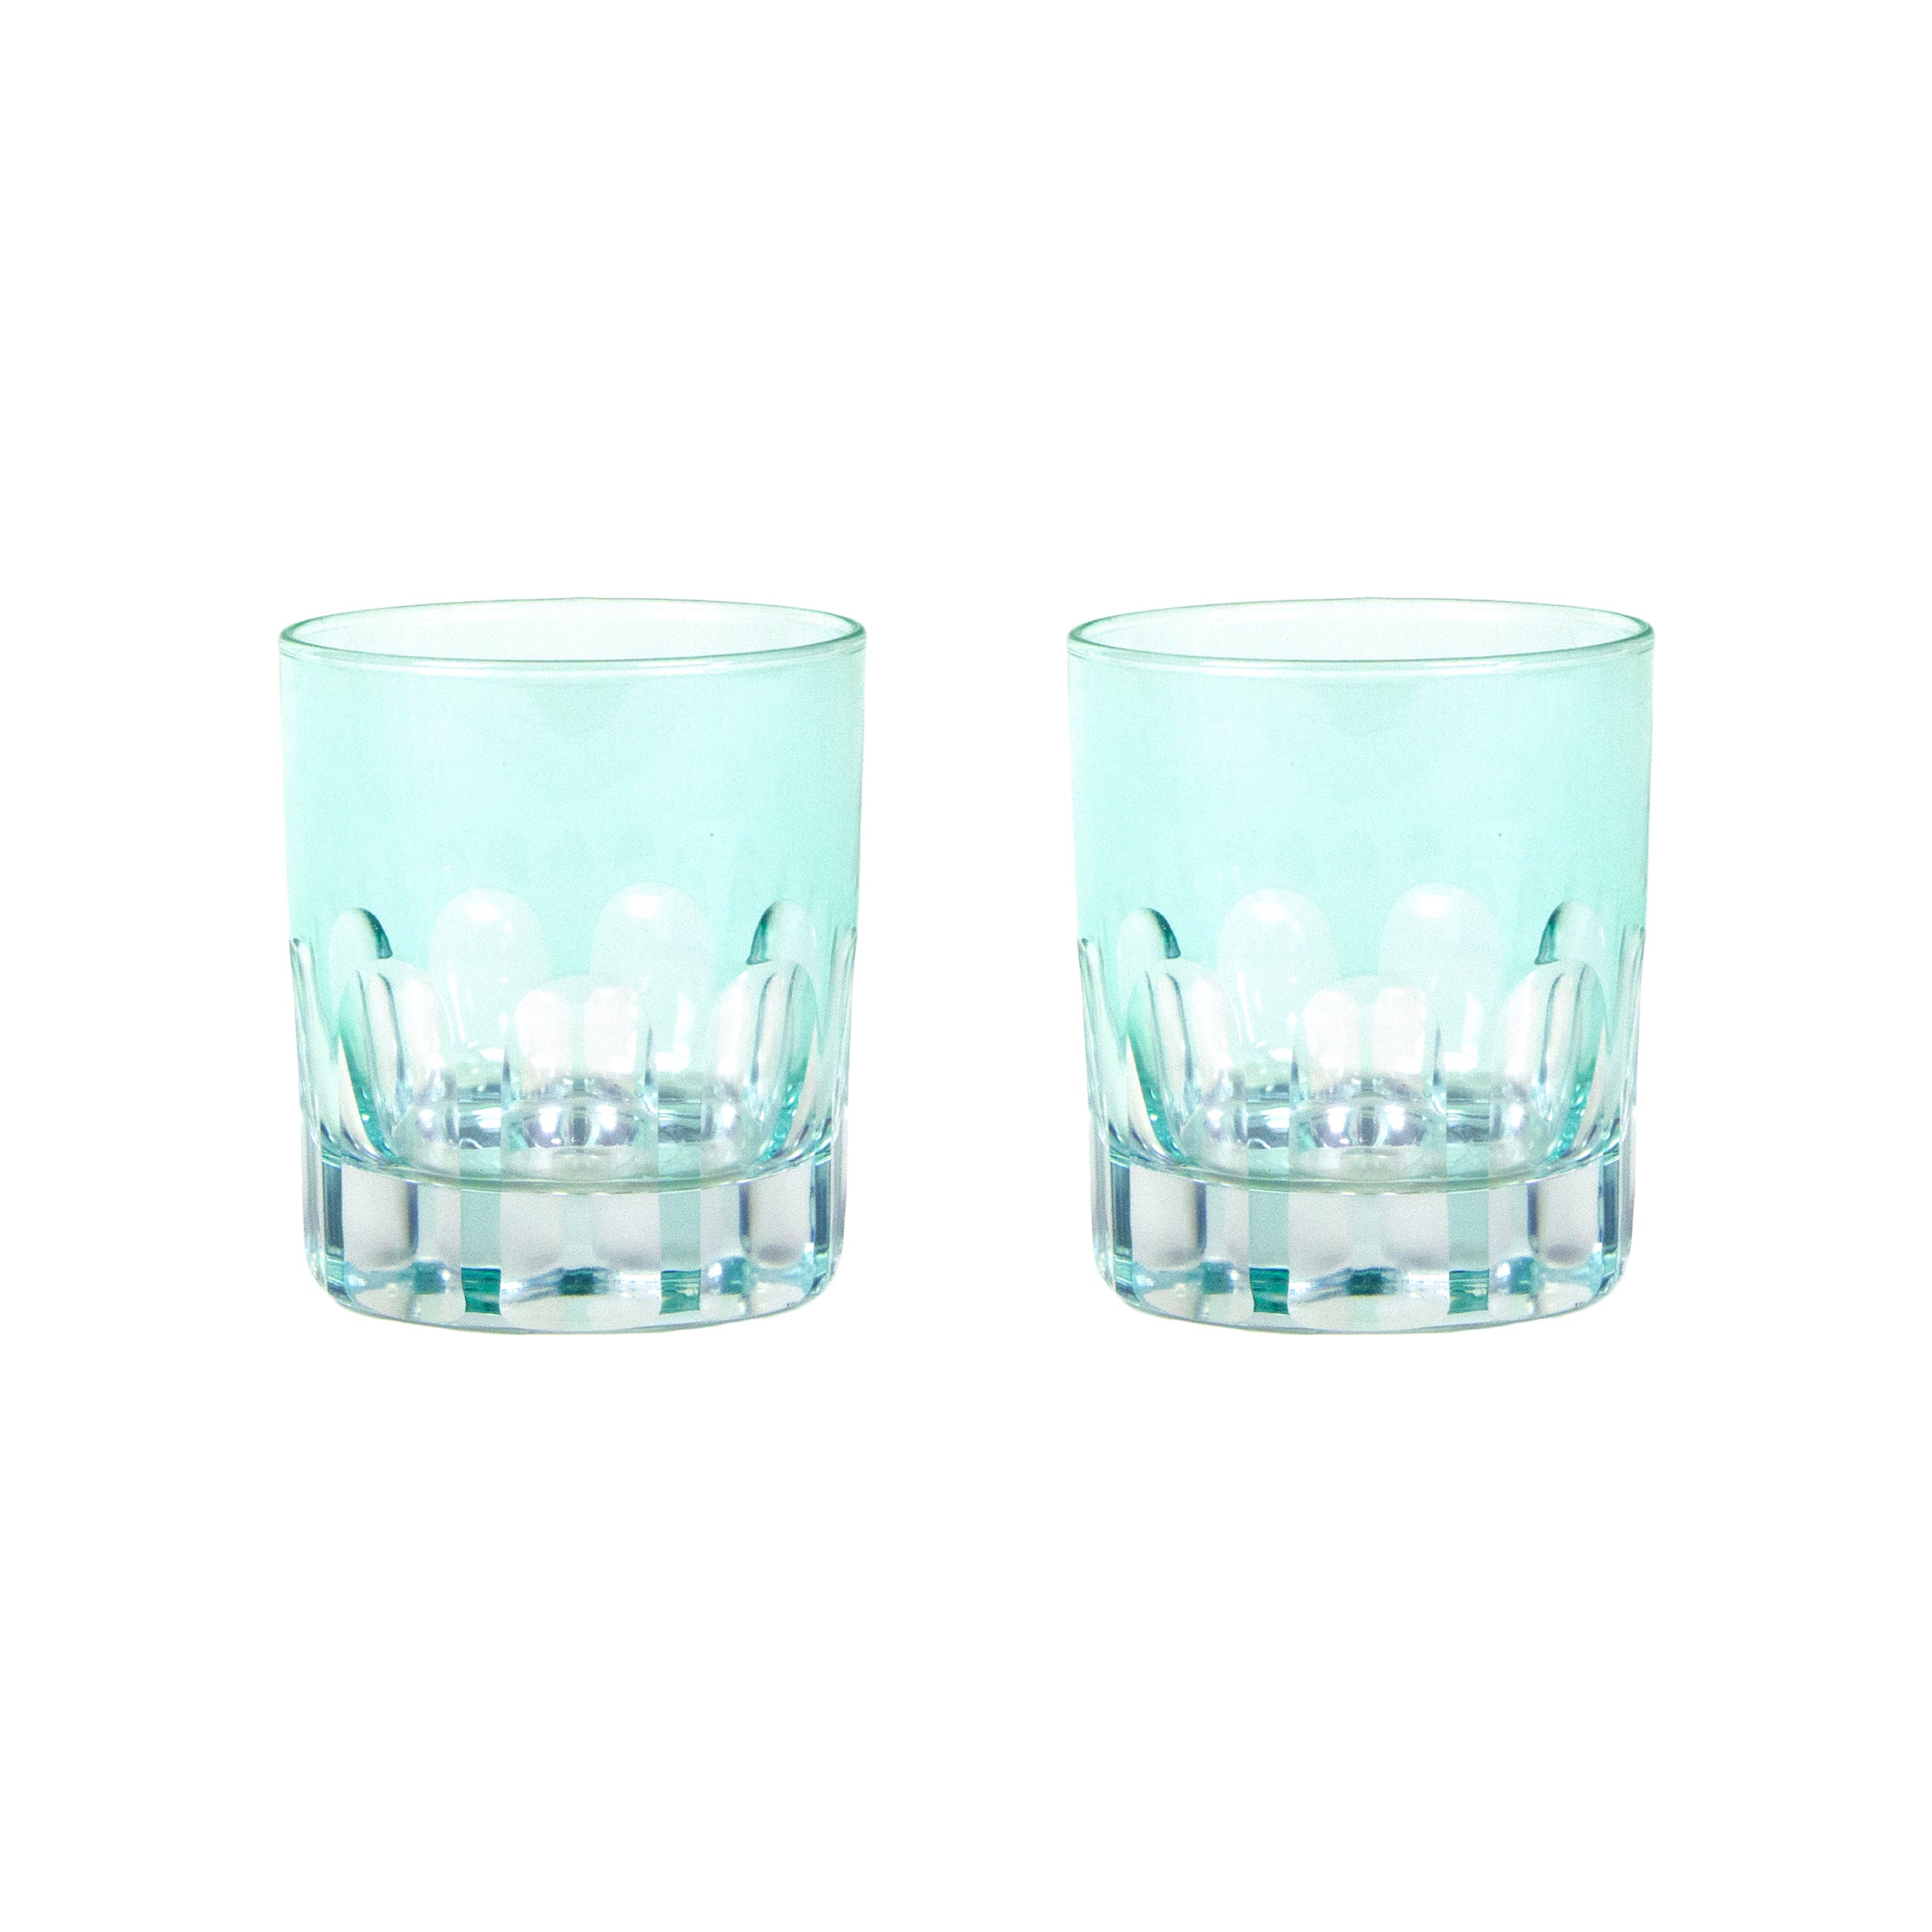 Sir Madam | Set of 2 Rialto Old Fashioned Glasses - Menthe